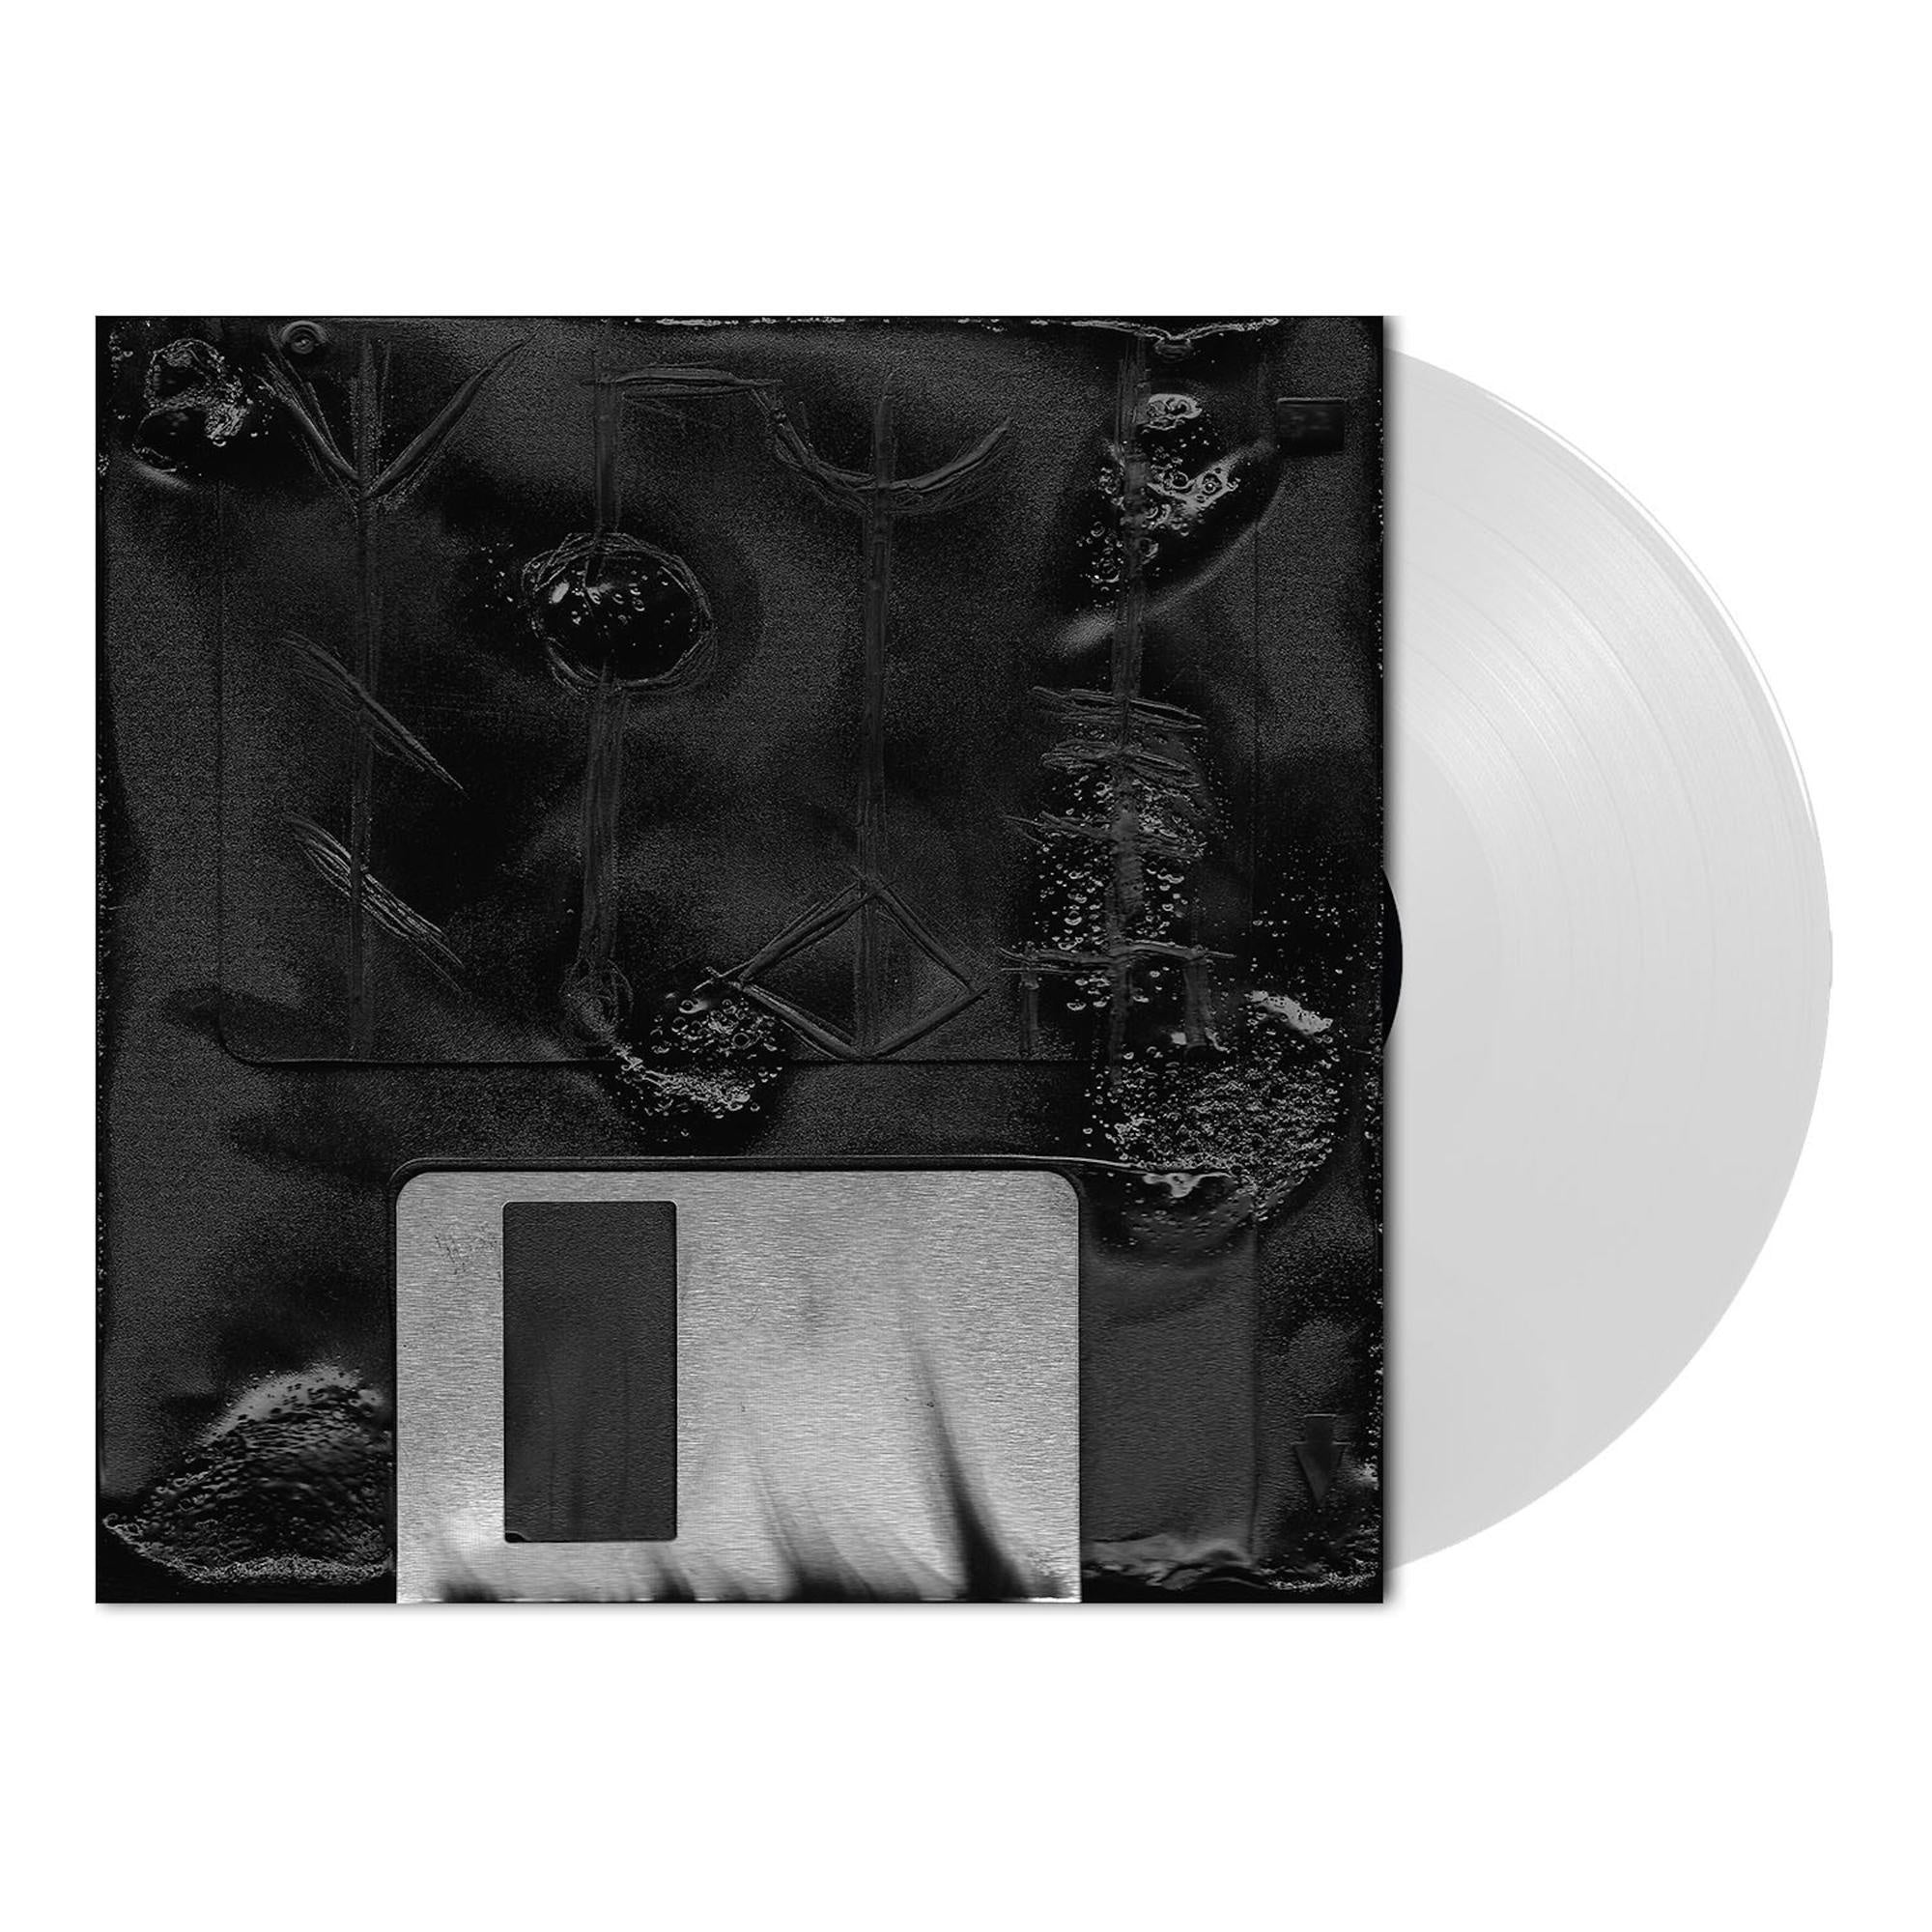 Master Boot Record ‎– Floppy Disk Overdrive - New 2 LP Record 2020 Metal Blade USA Clear Vinyl - Heavy Metal / Chiptune